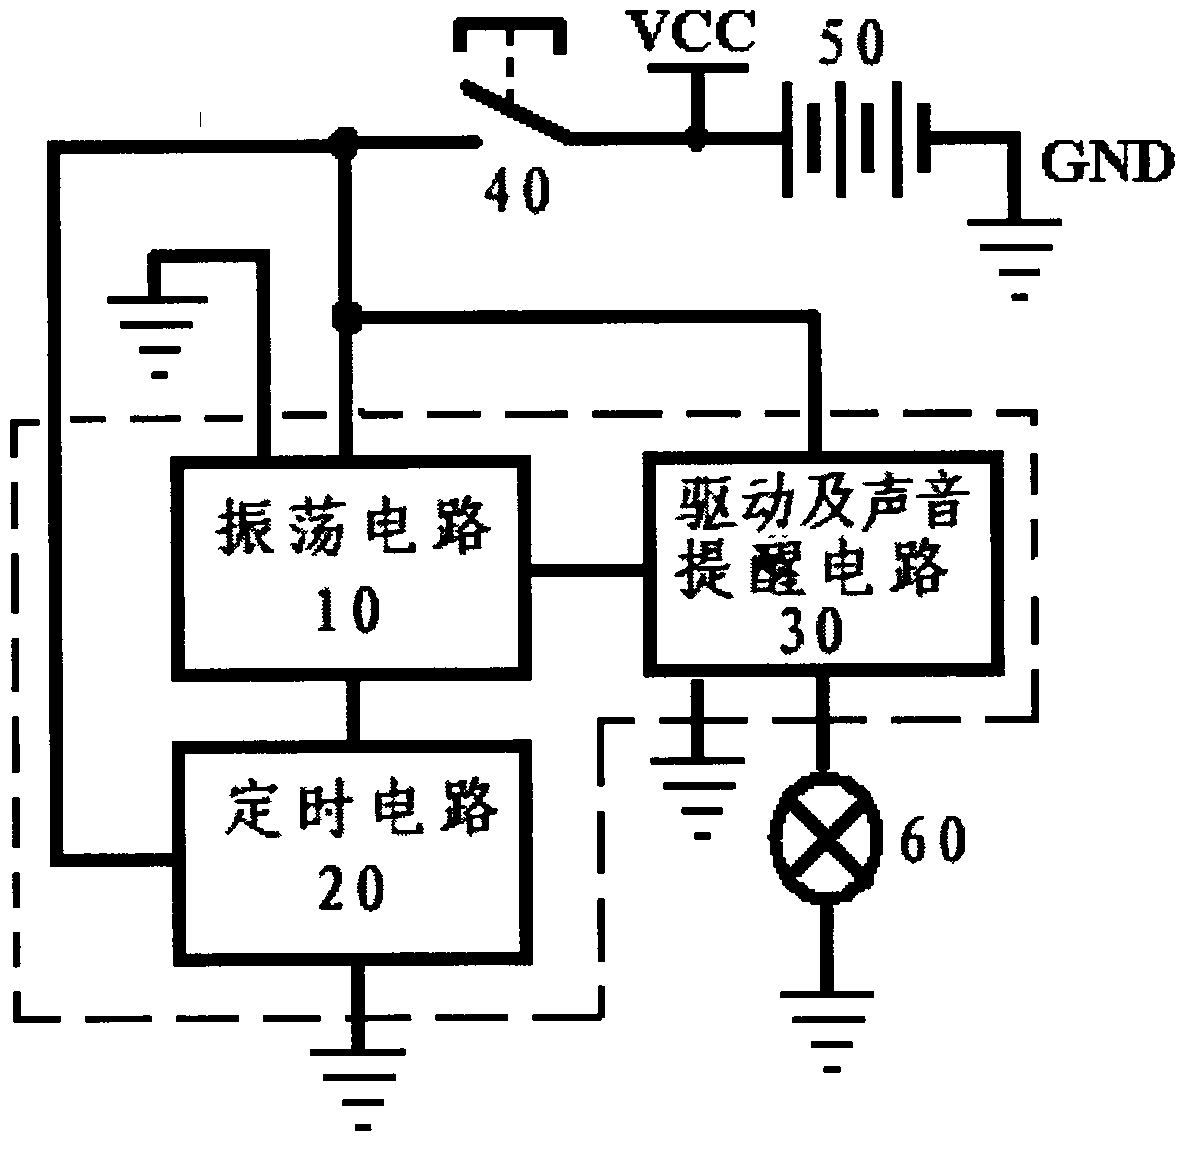 Brake light controller with functions of sparkling and making sound to alert filament disconnection